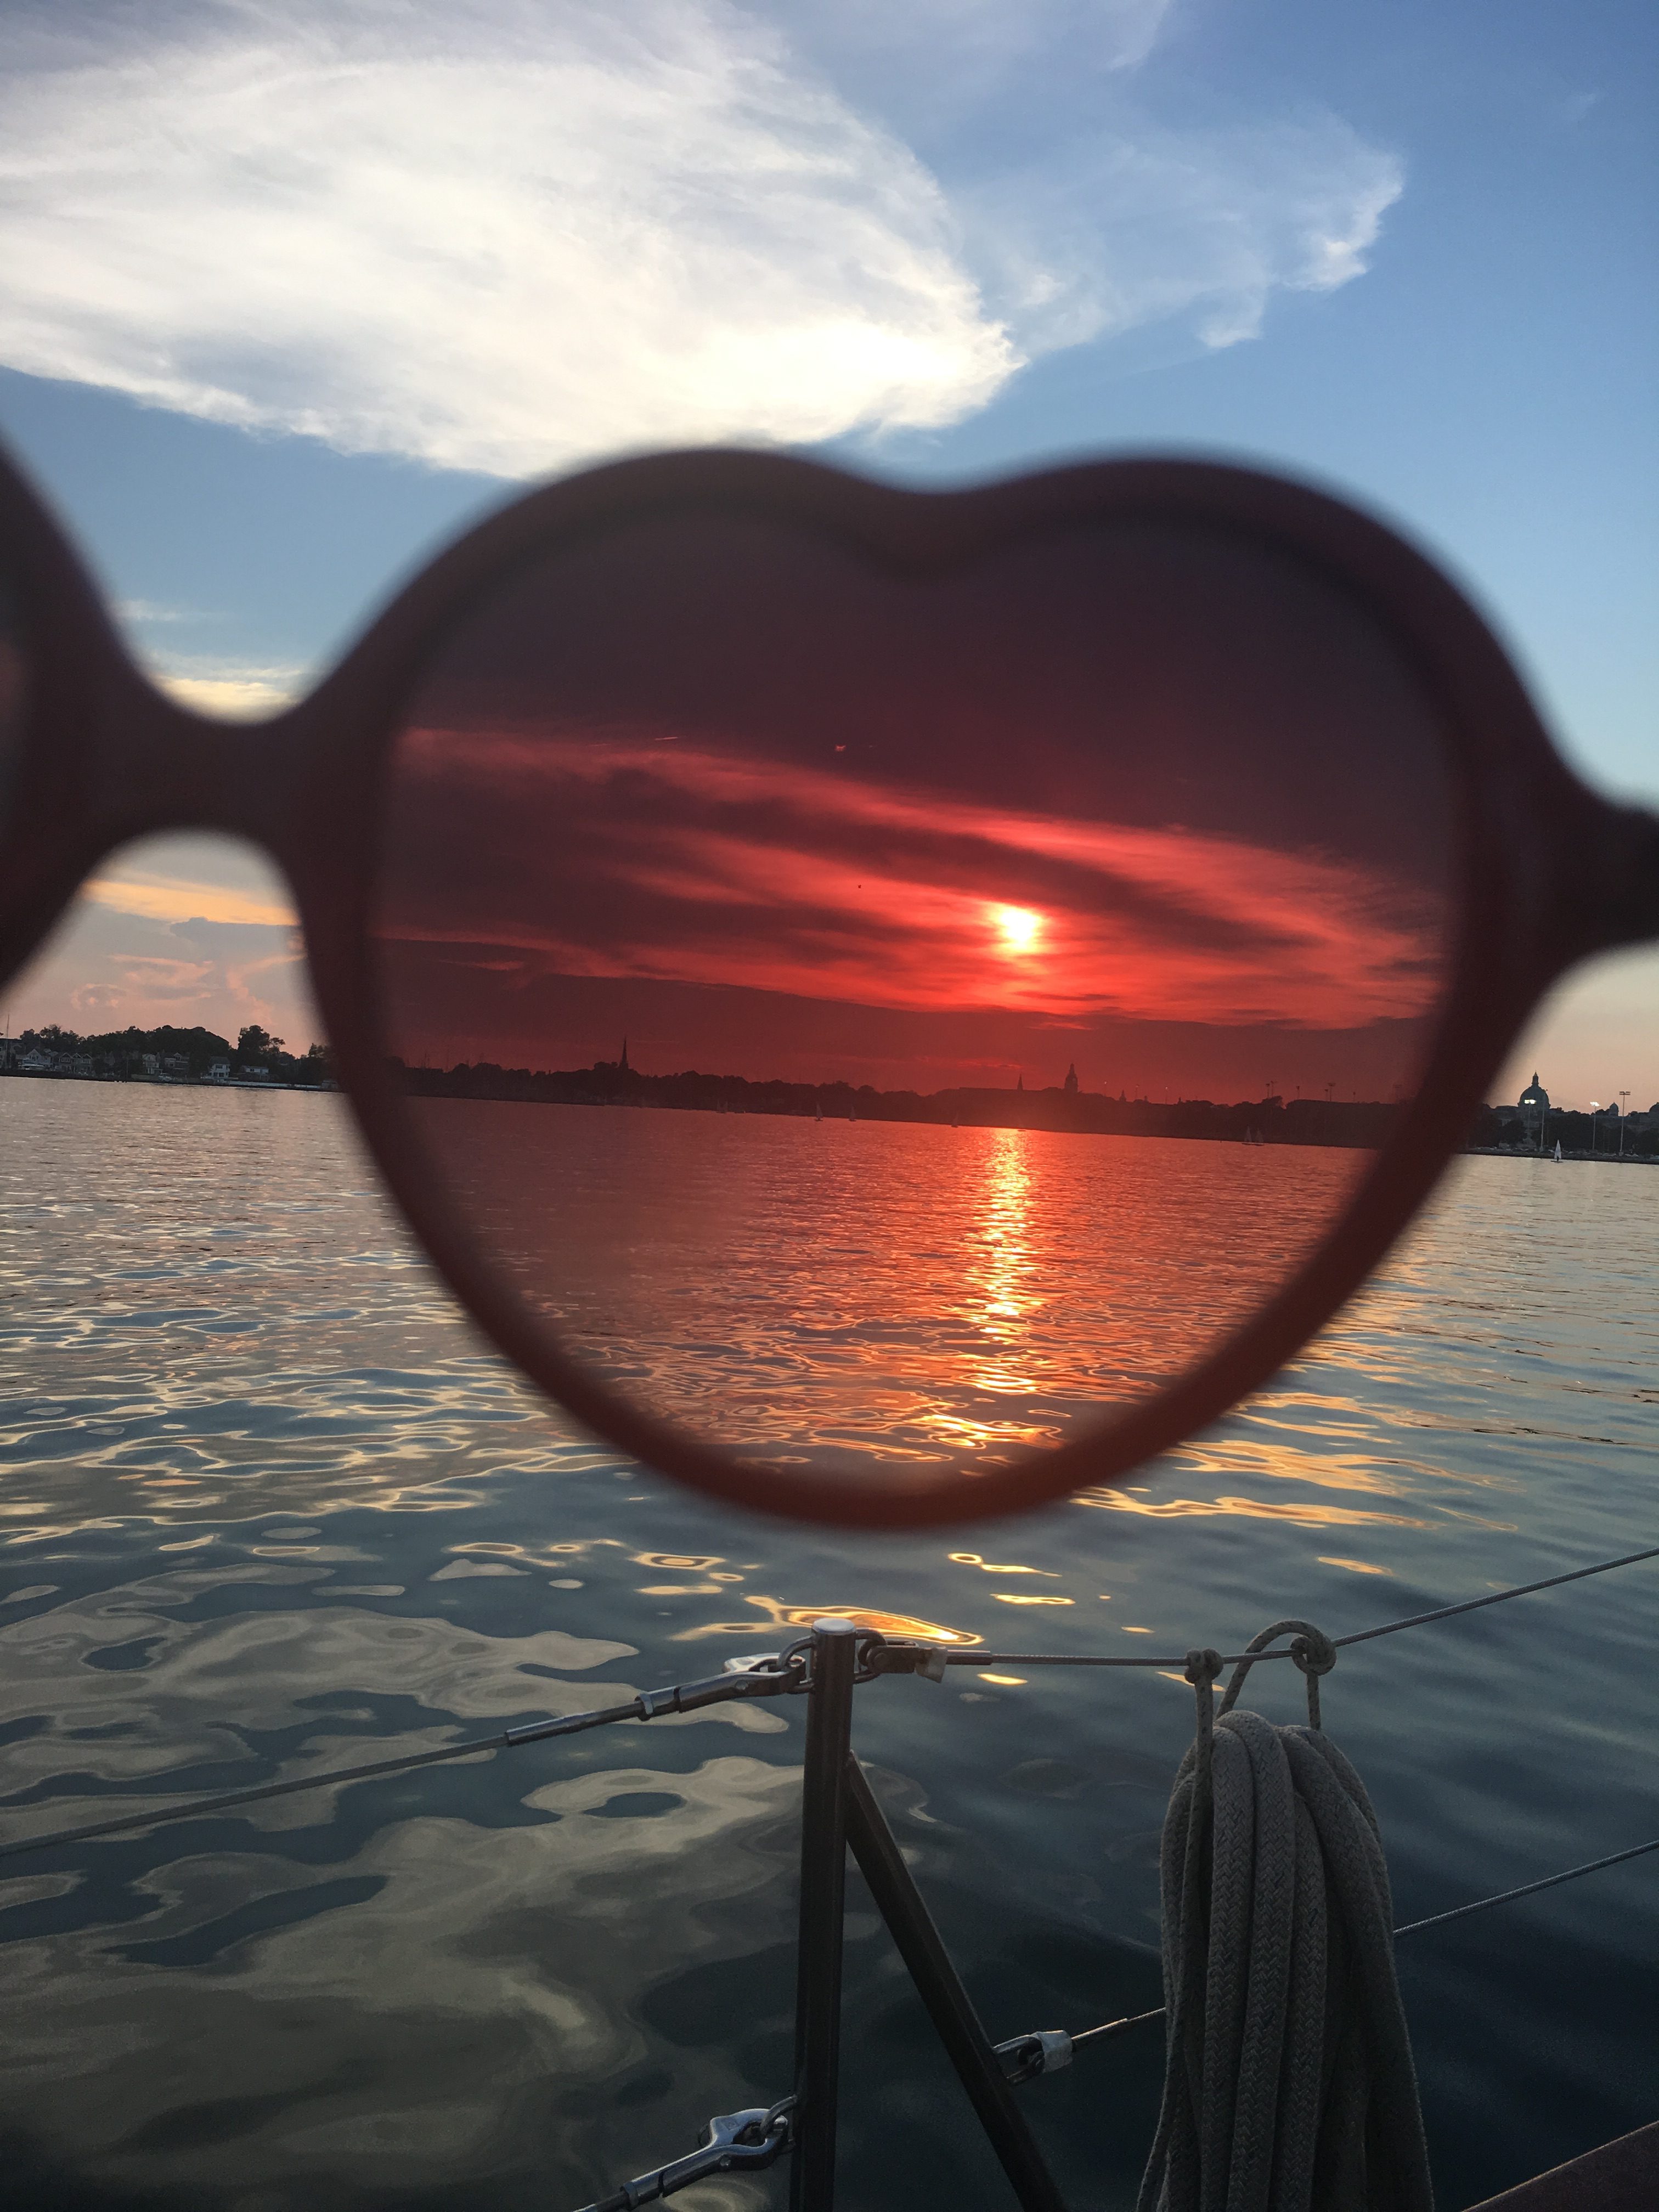 Sunset viewed through sunglasses from the boat